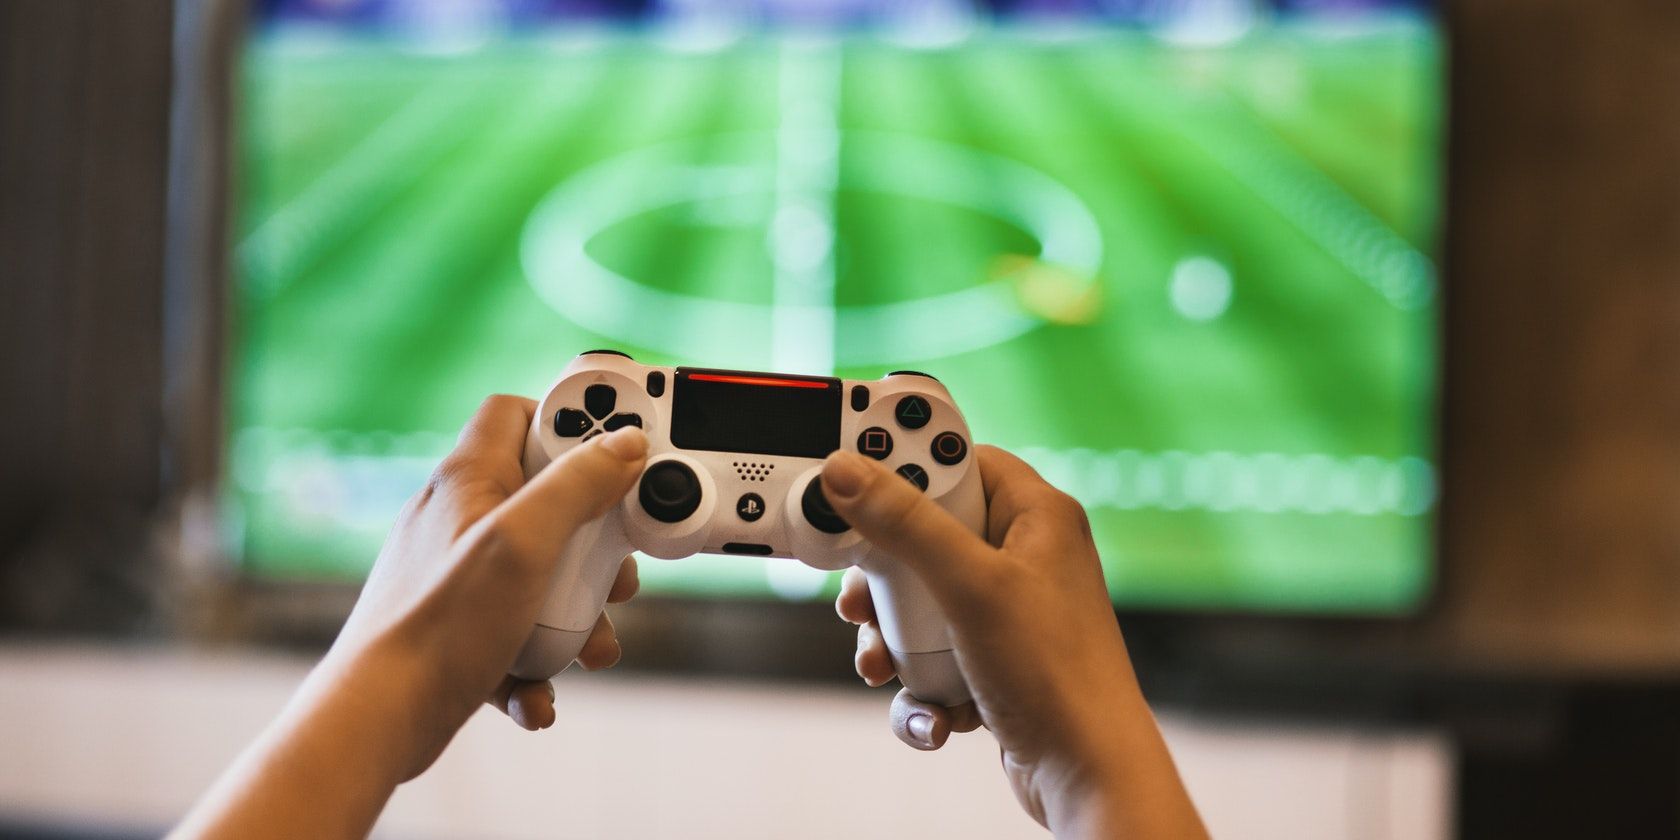 A pair of hands holding a game console in front of a television